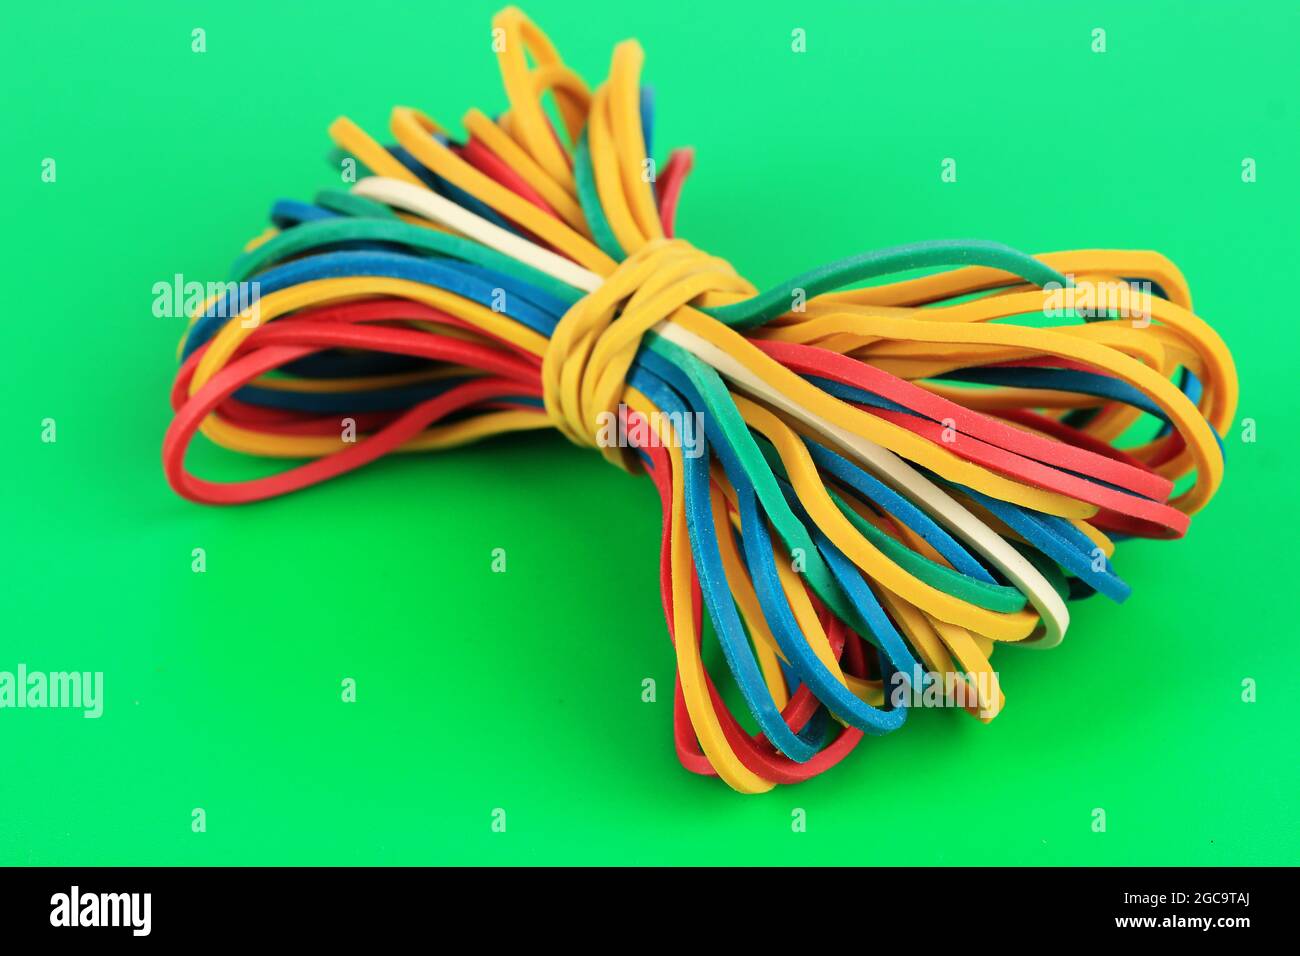 Colorful rubber bands on green background Stock Photo by